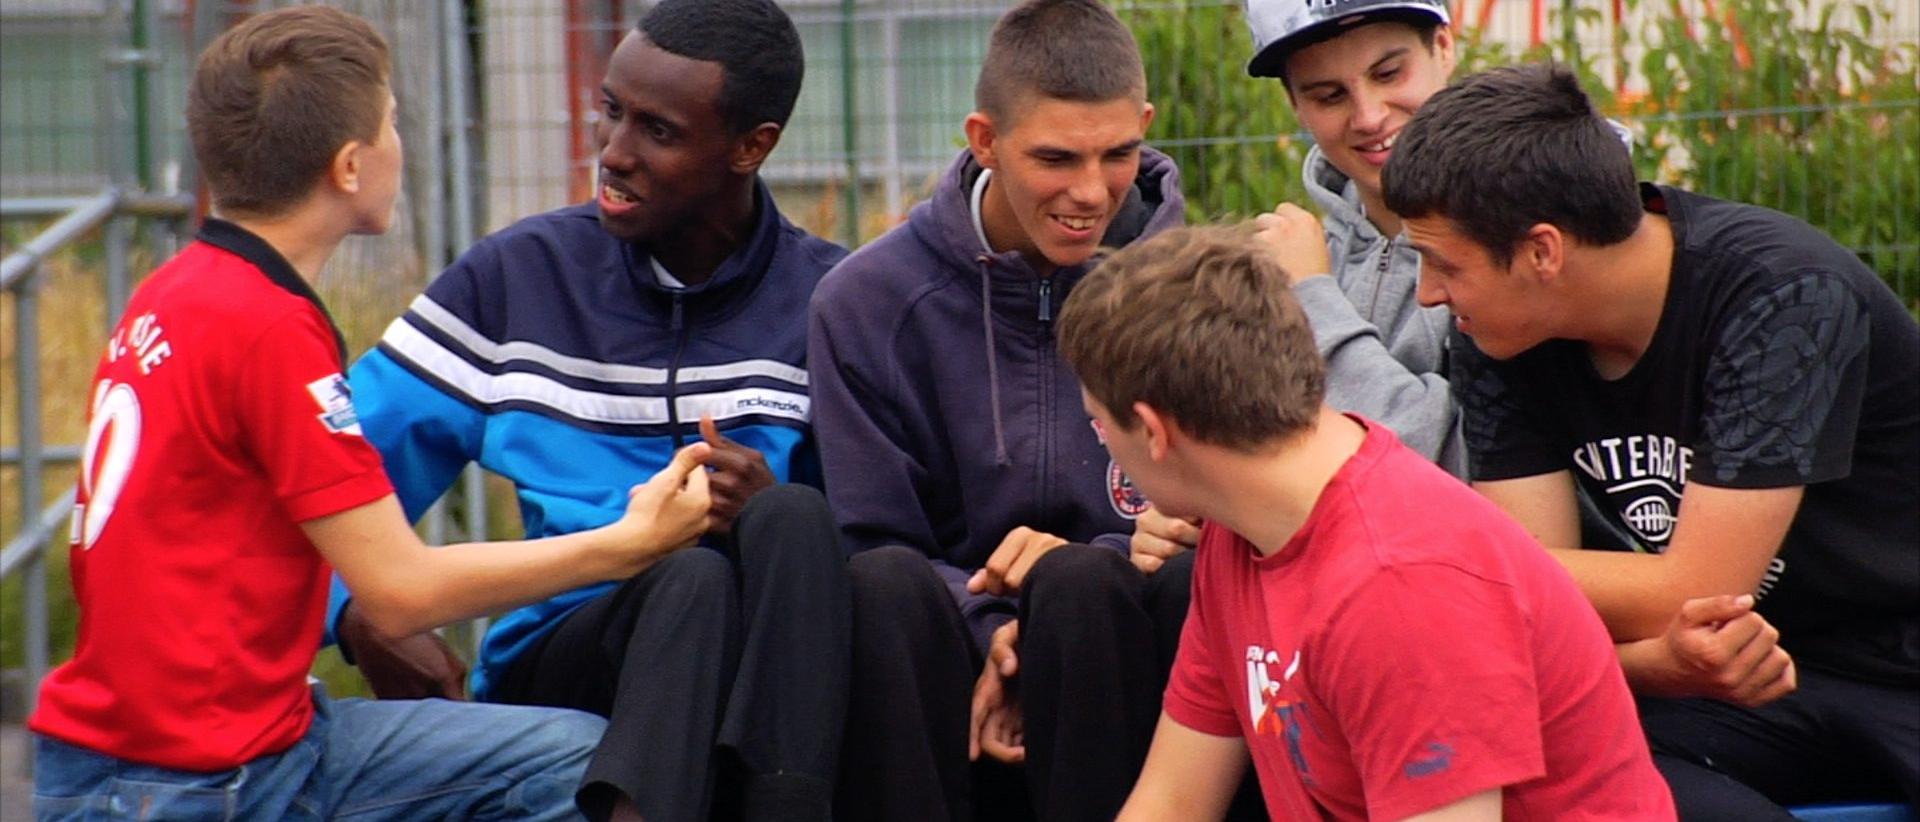 a group of young people sitting outside talking and laughing